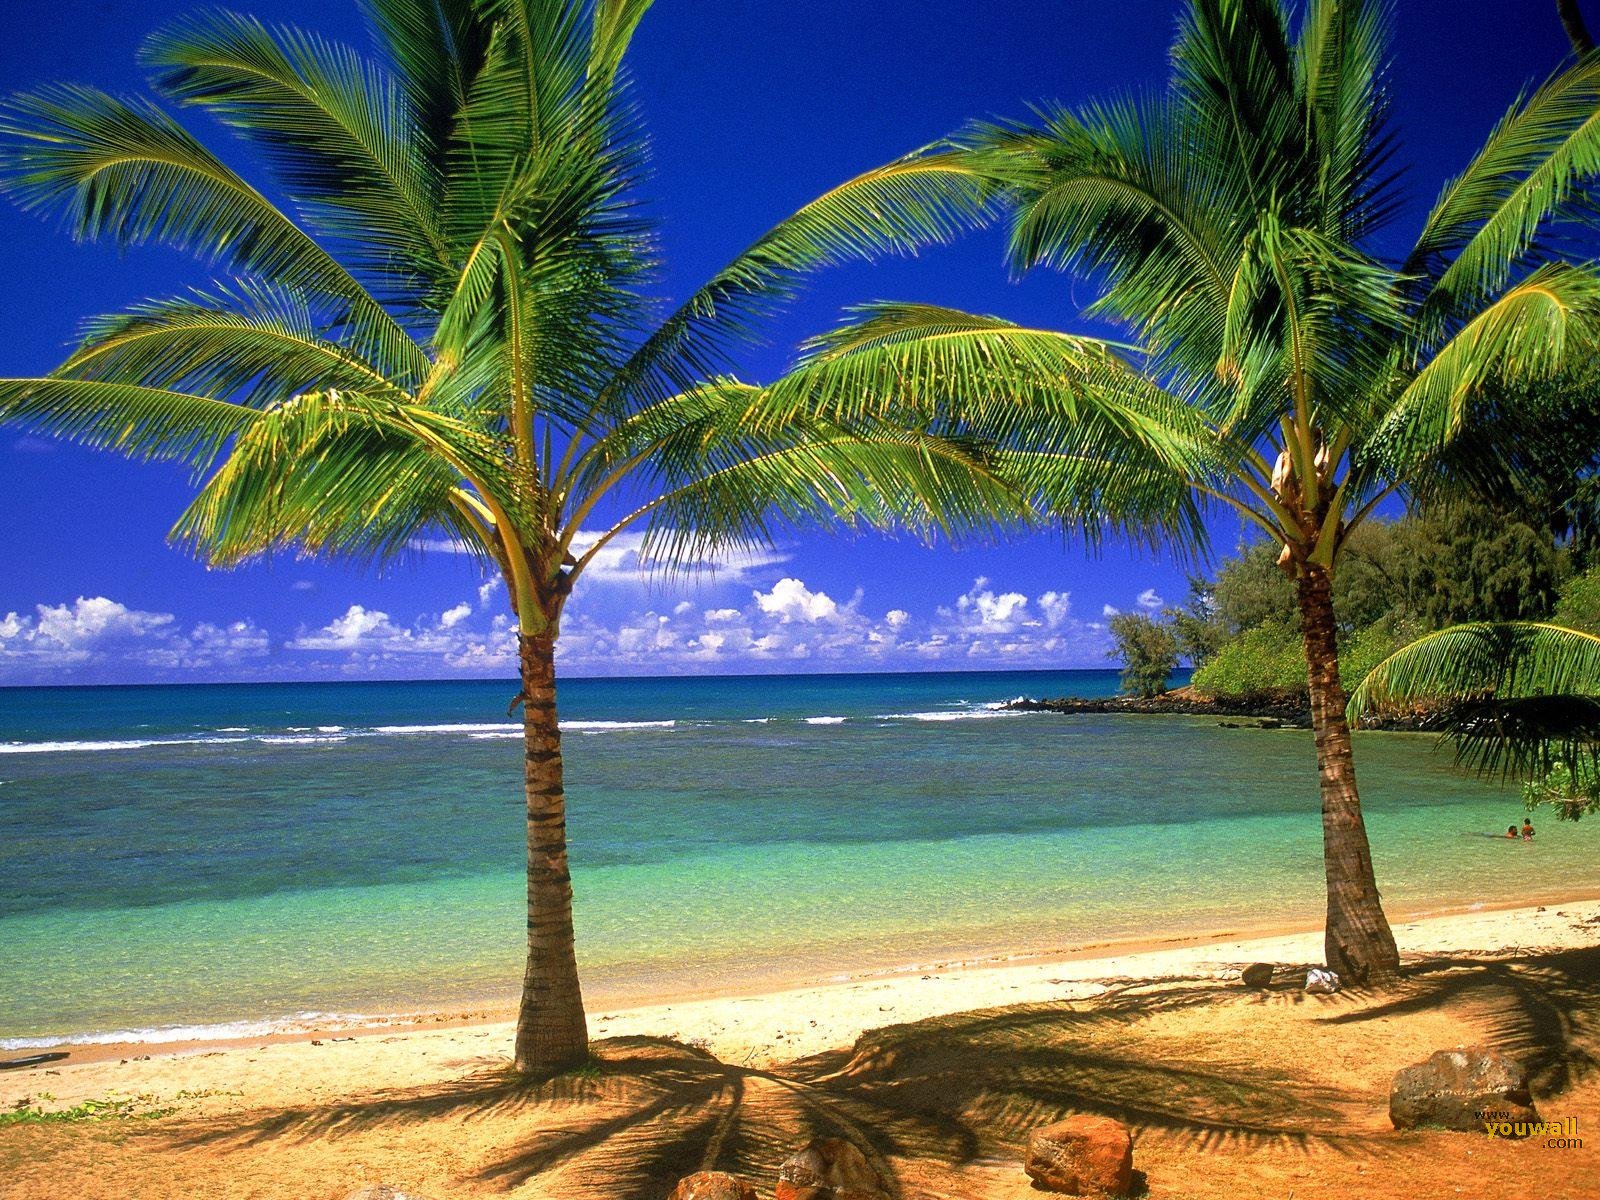 Image Wallpaper Image Sea And Beaches